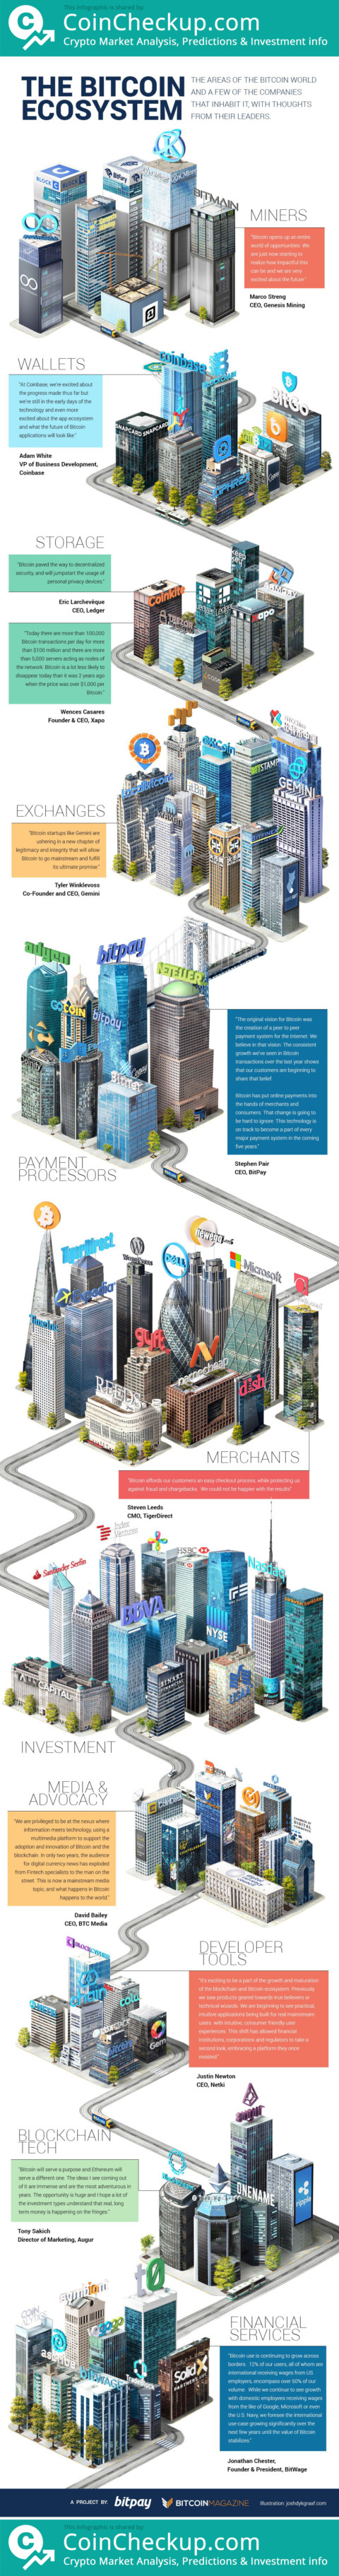 The Bitcoin Ecosystem Infographic